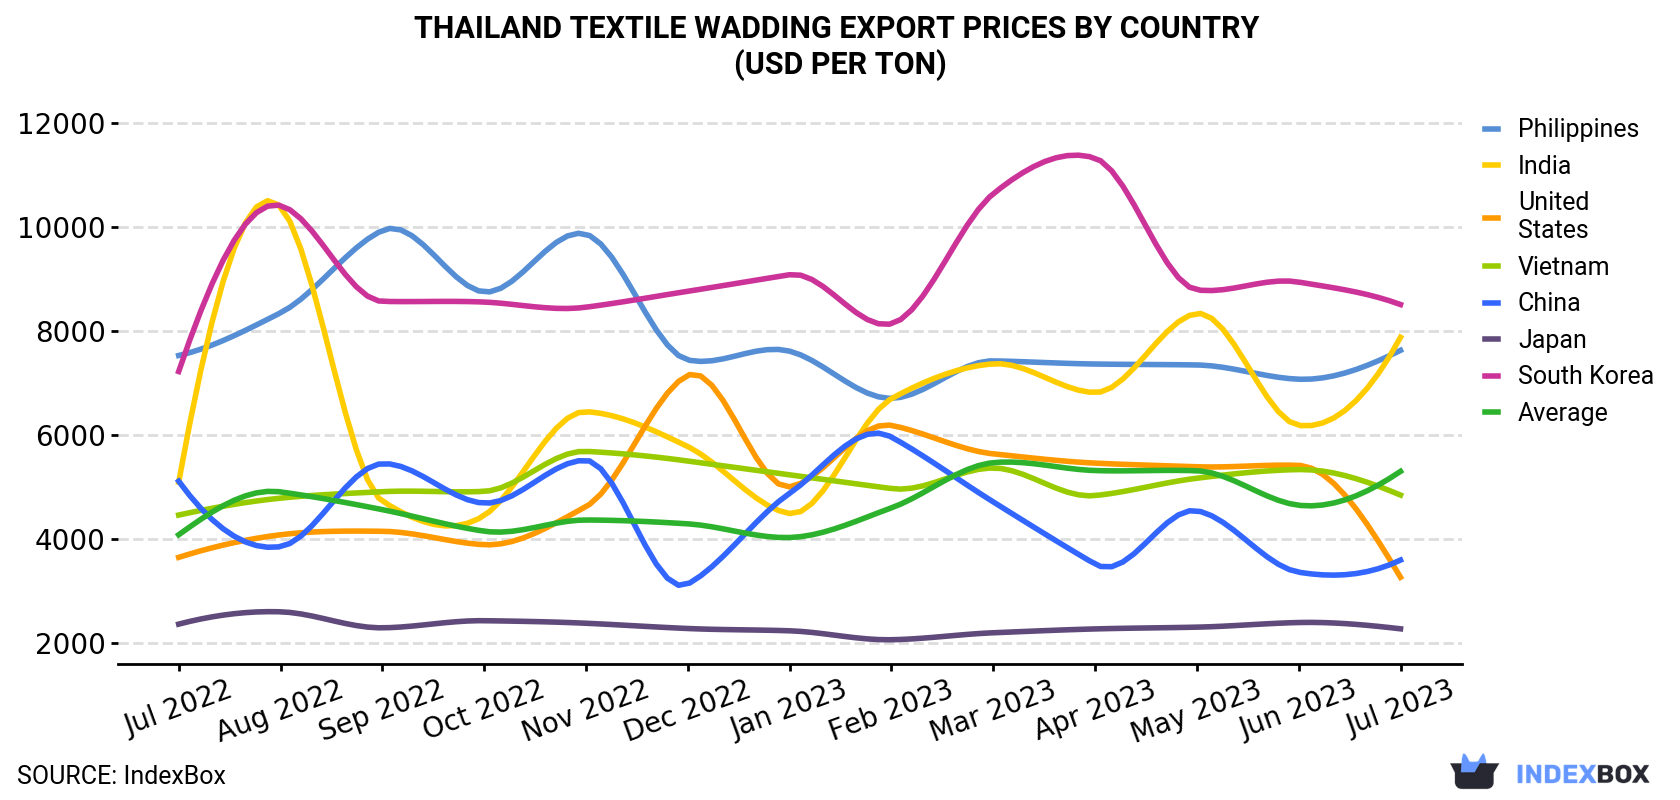 Thailand Textile Wadding Export Prices By Country (USD Per Ton)